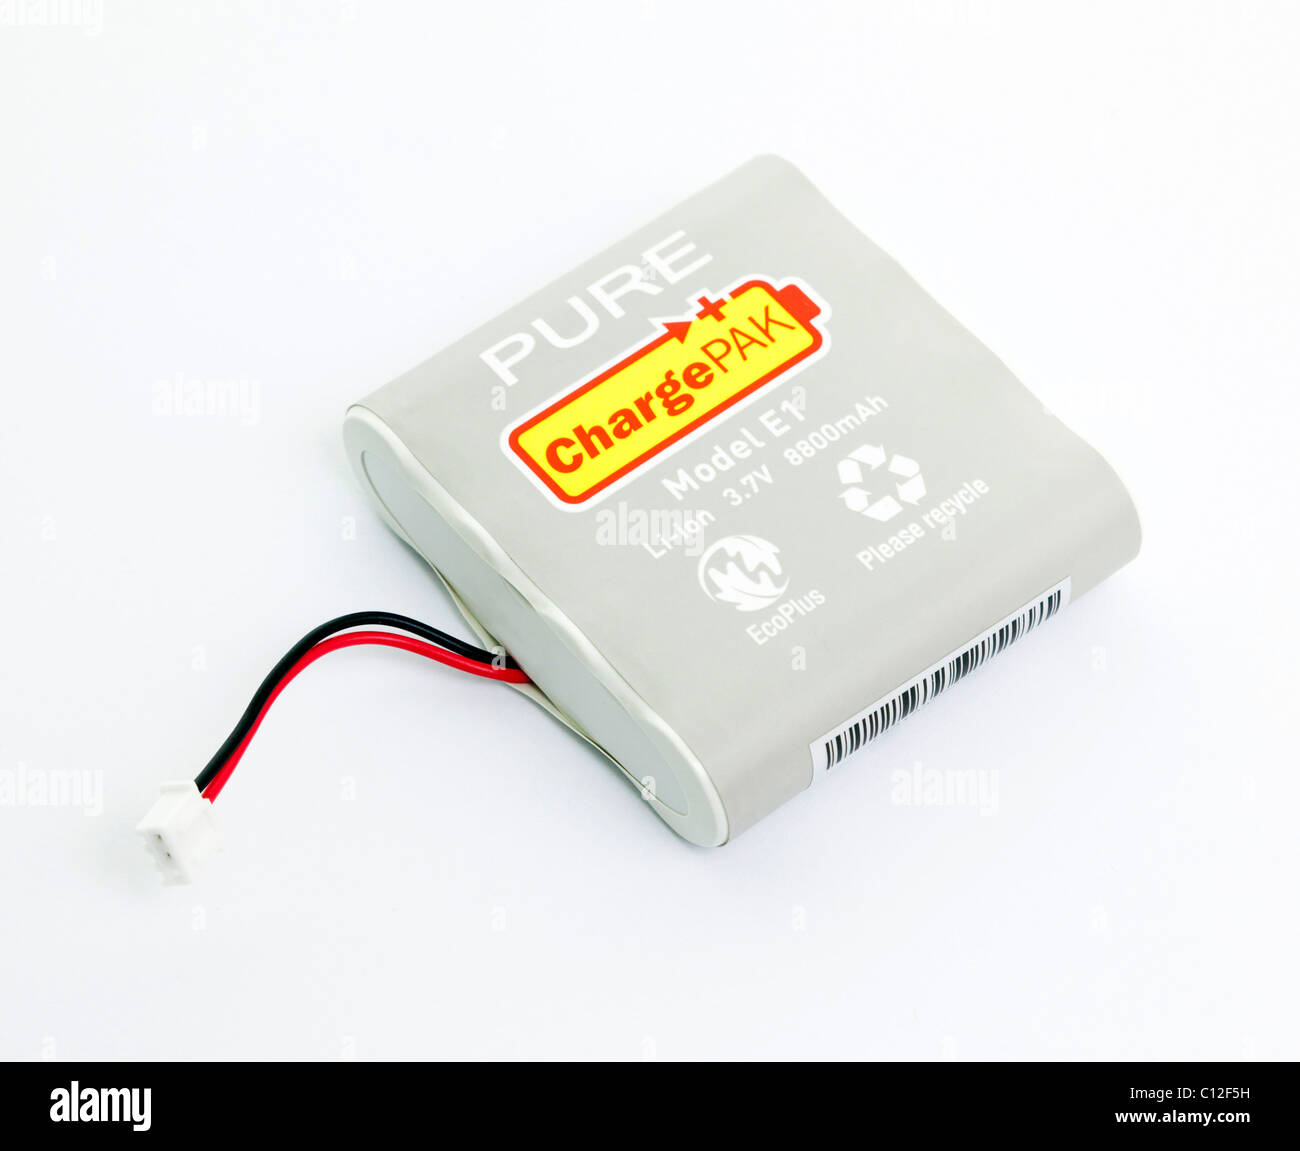 lithium ion battery pack 3.7 volt and 8.8AH Stock Photo